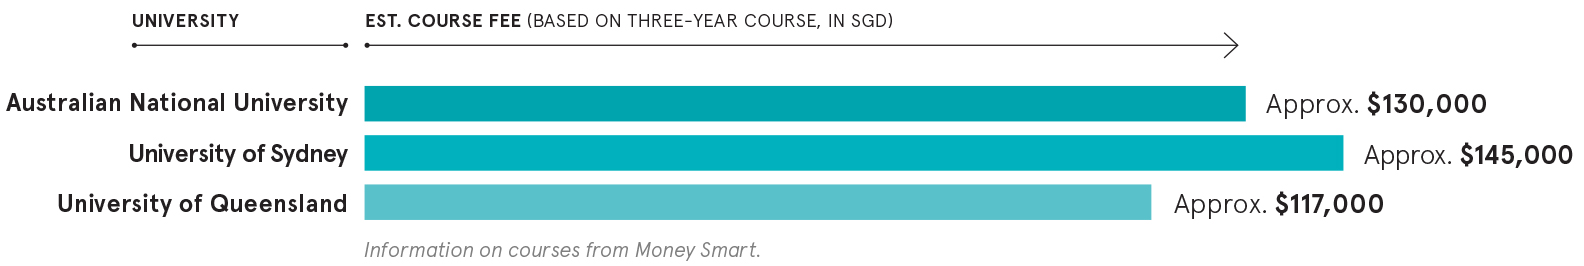 Est. course fee (based on three-year course, in SGD) 